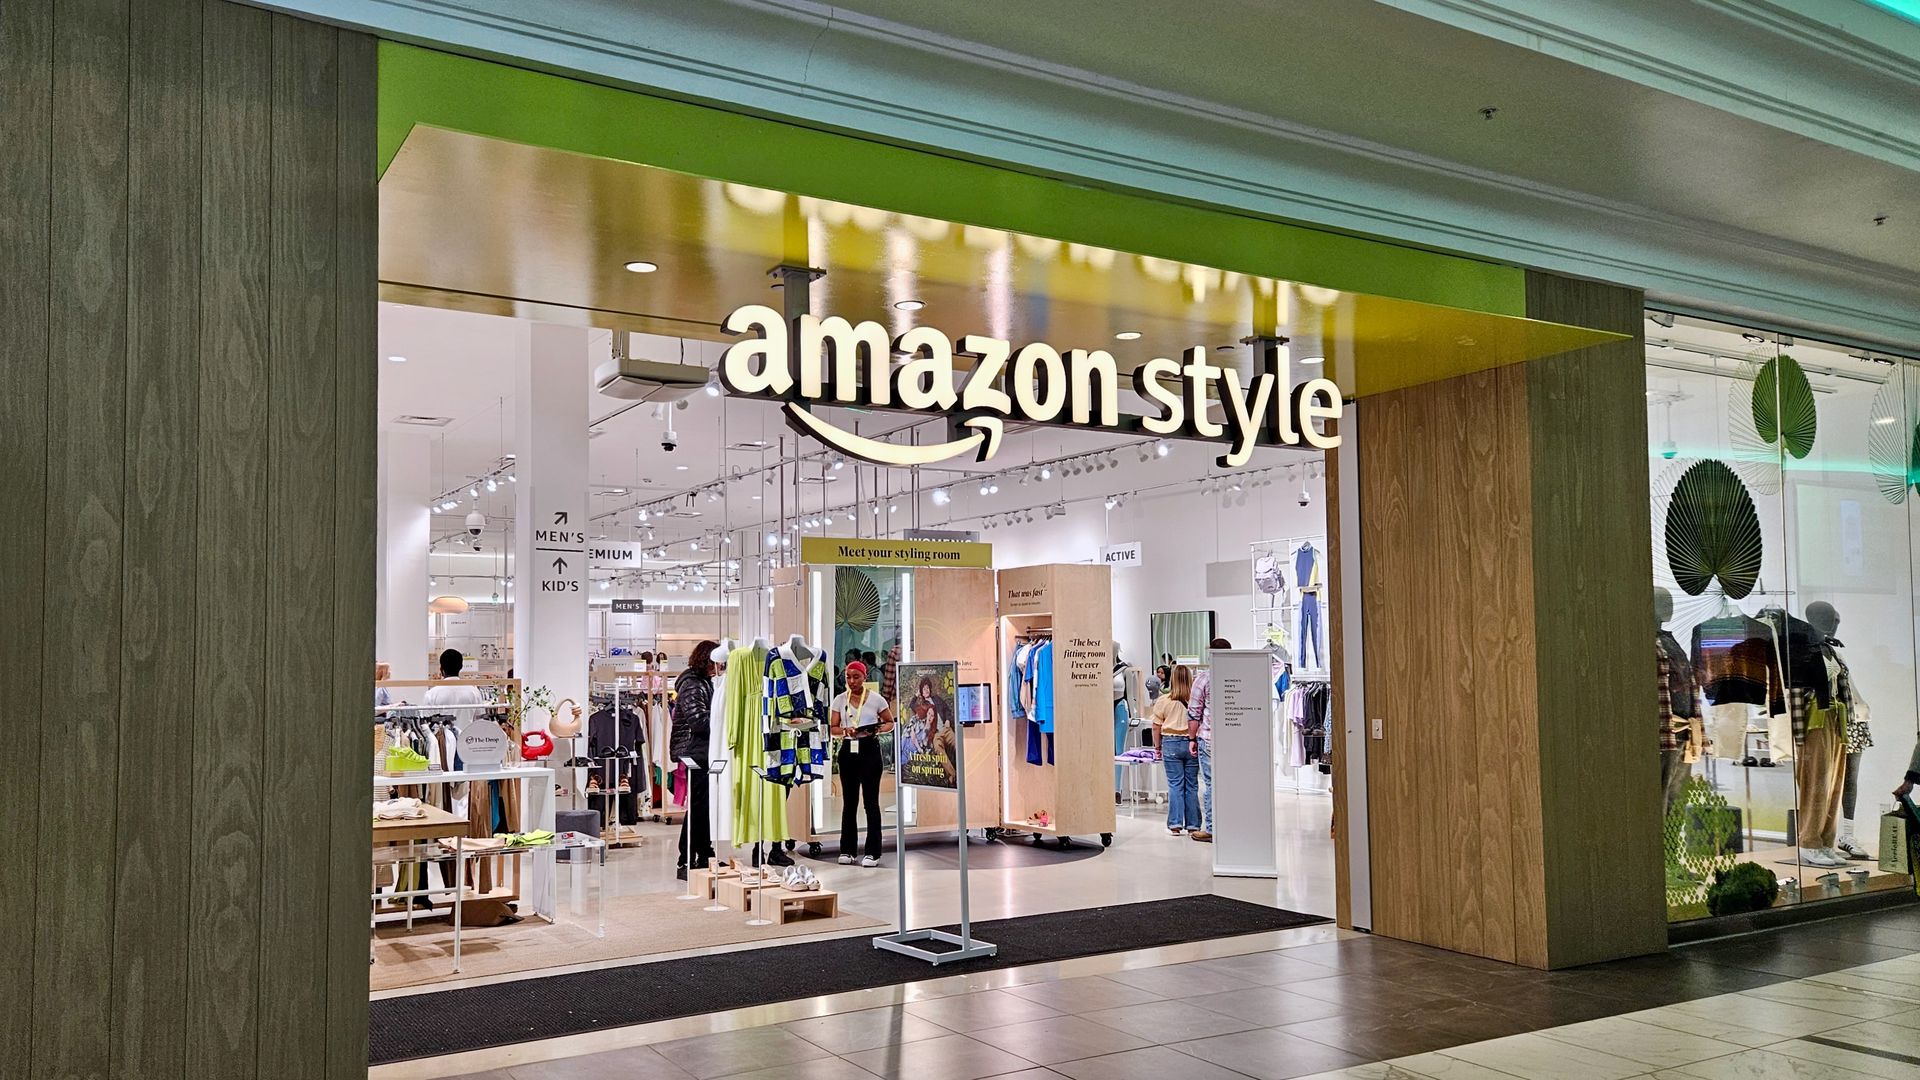 The exterior of the Amazon Style store, with mannequin displays